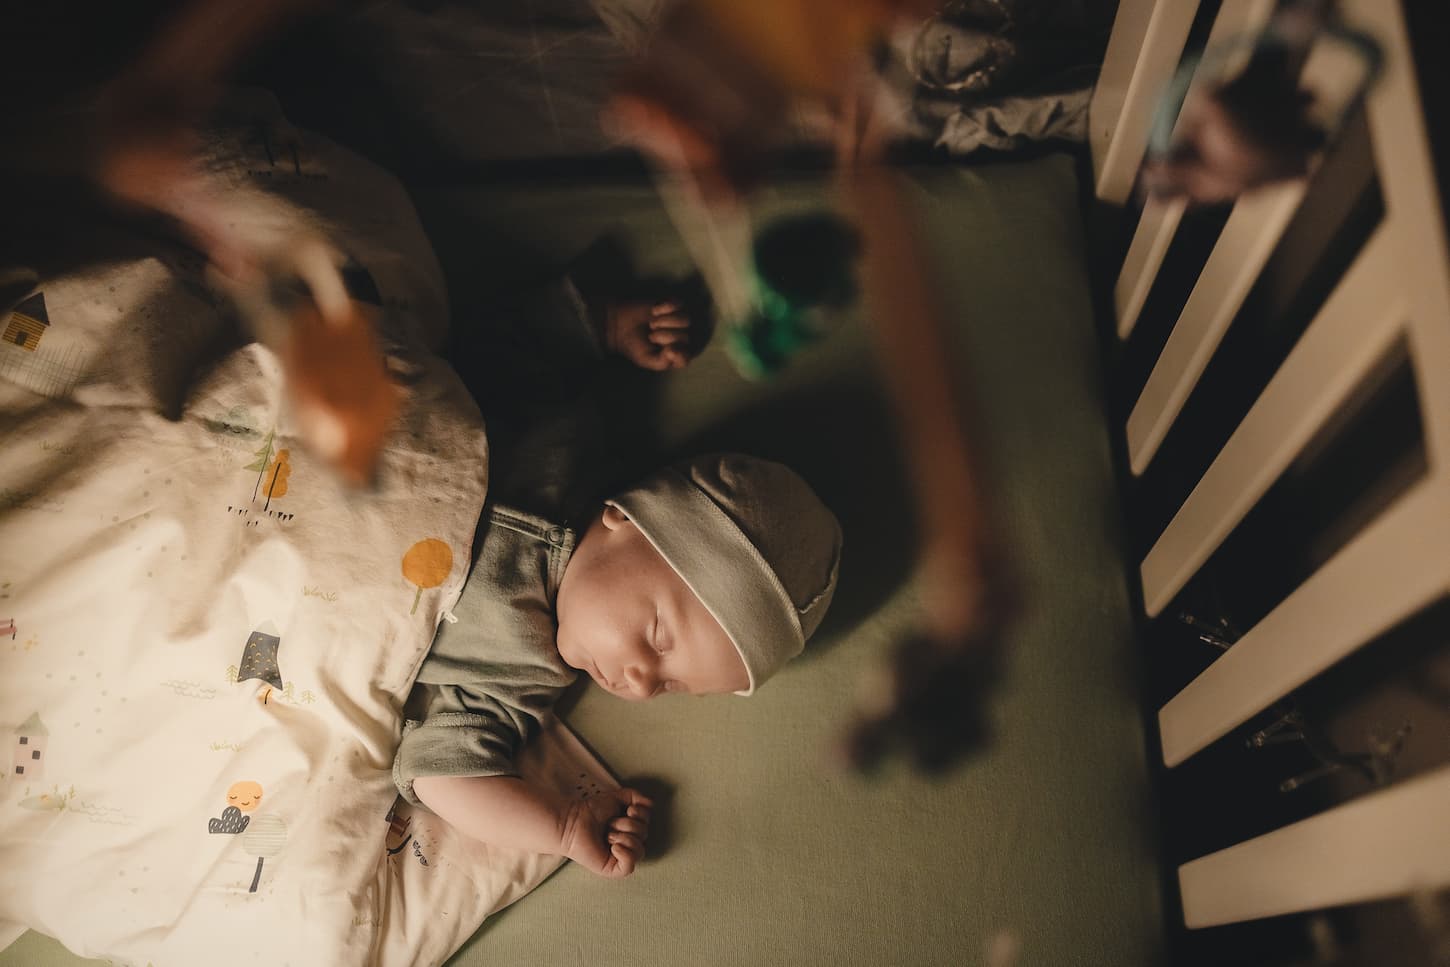 An image of a sleeping baby in a baby cot with mobile over his head.